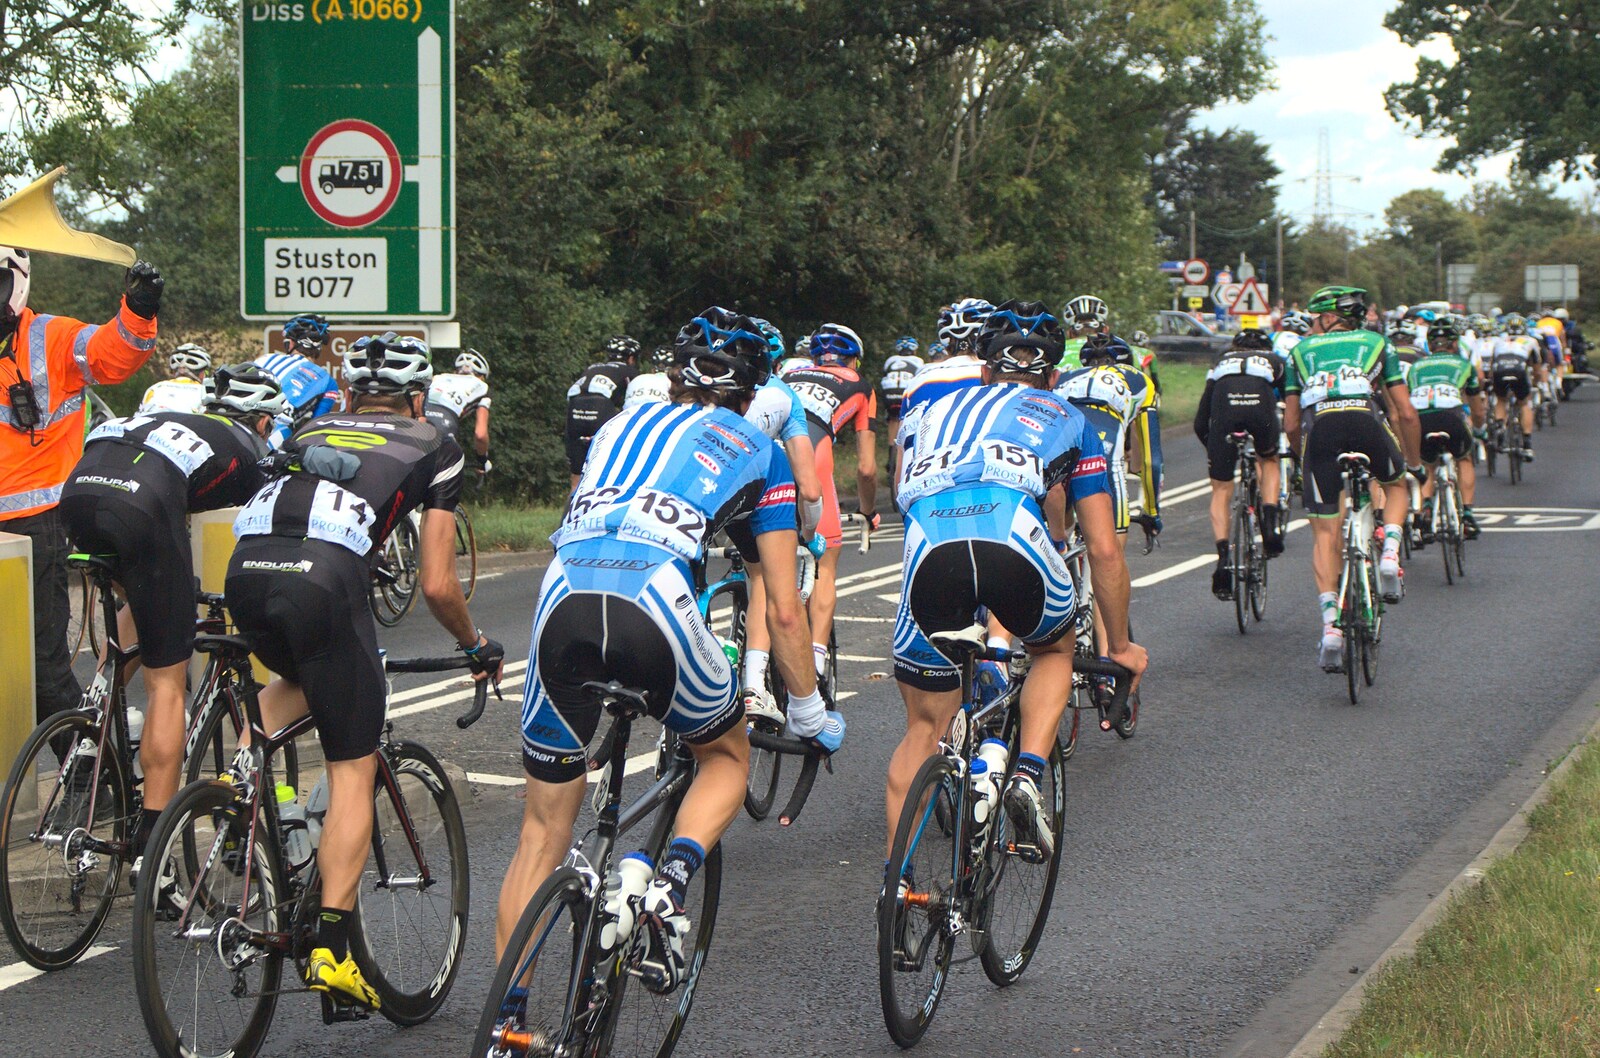 The big group heads up the A140 towards Diss from The Tour of Britain, Brome, Suffolk - 17th September 2011